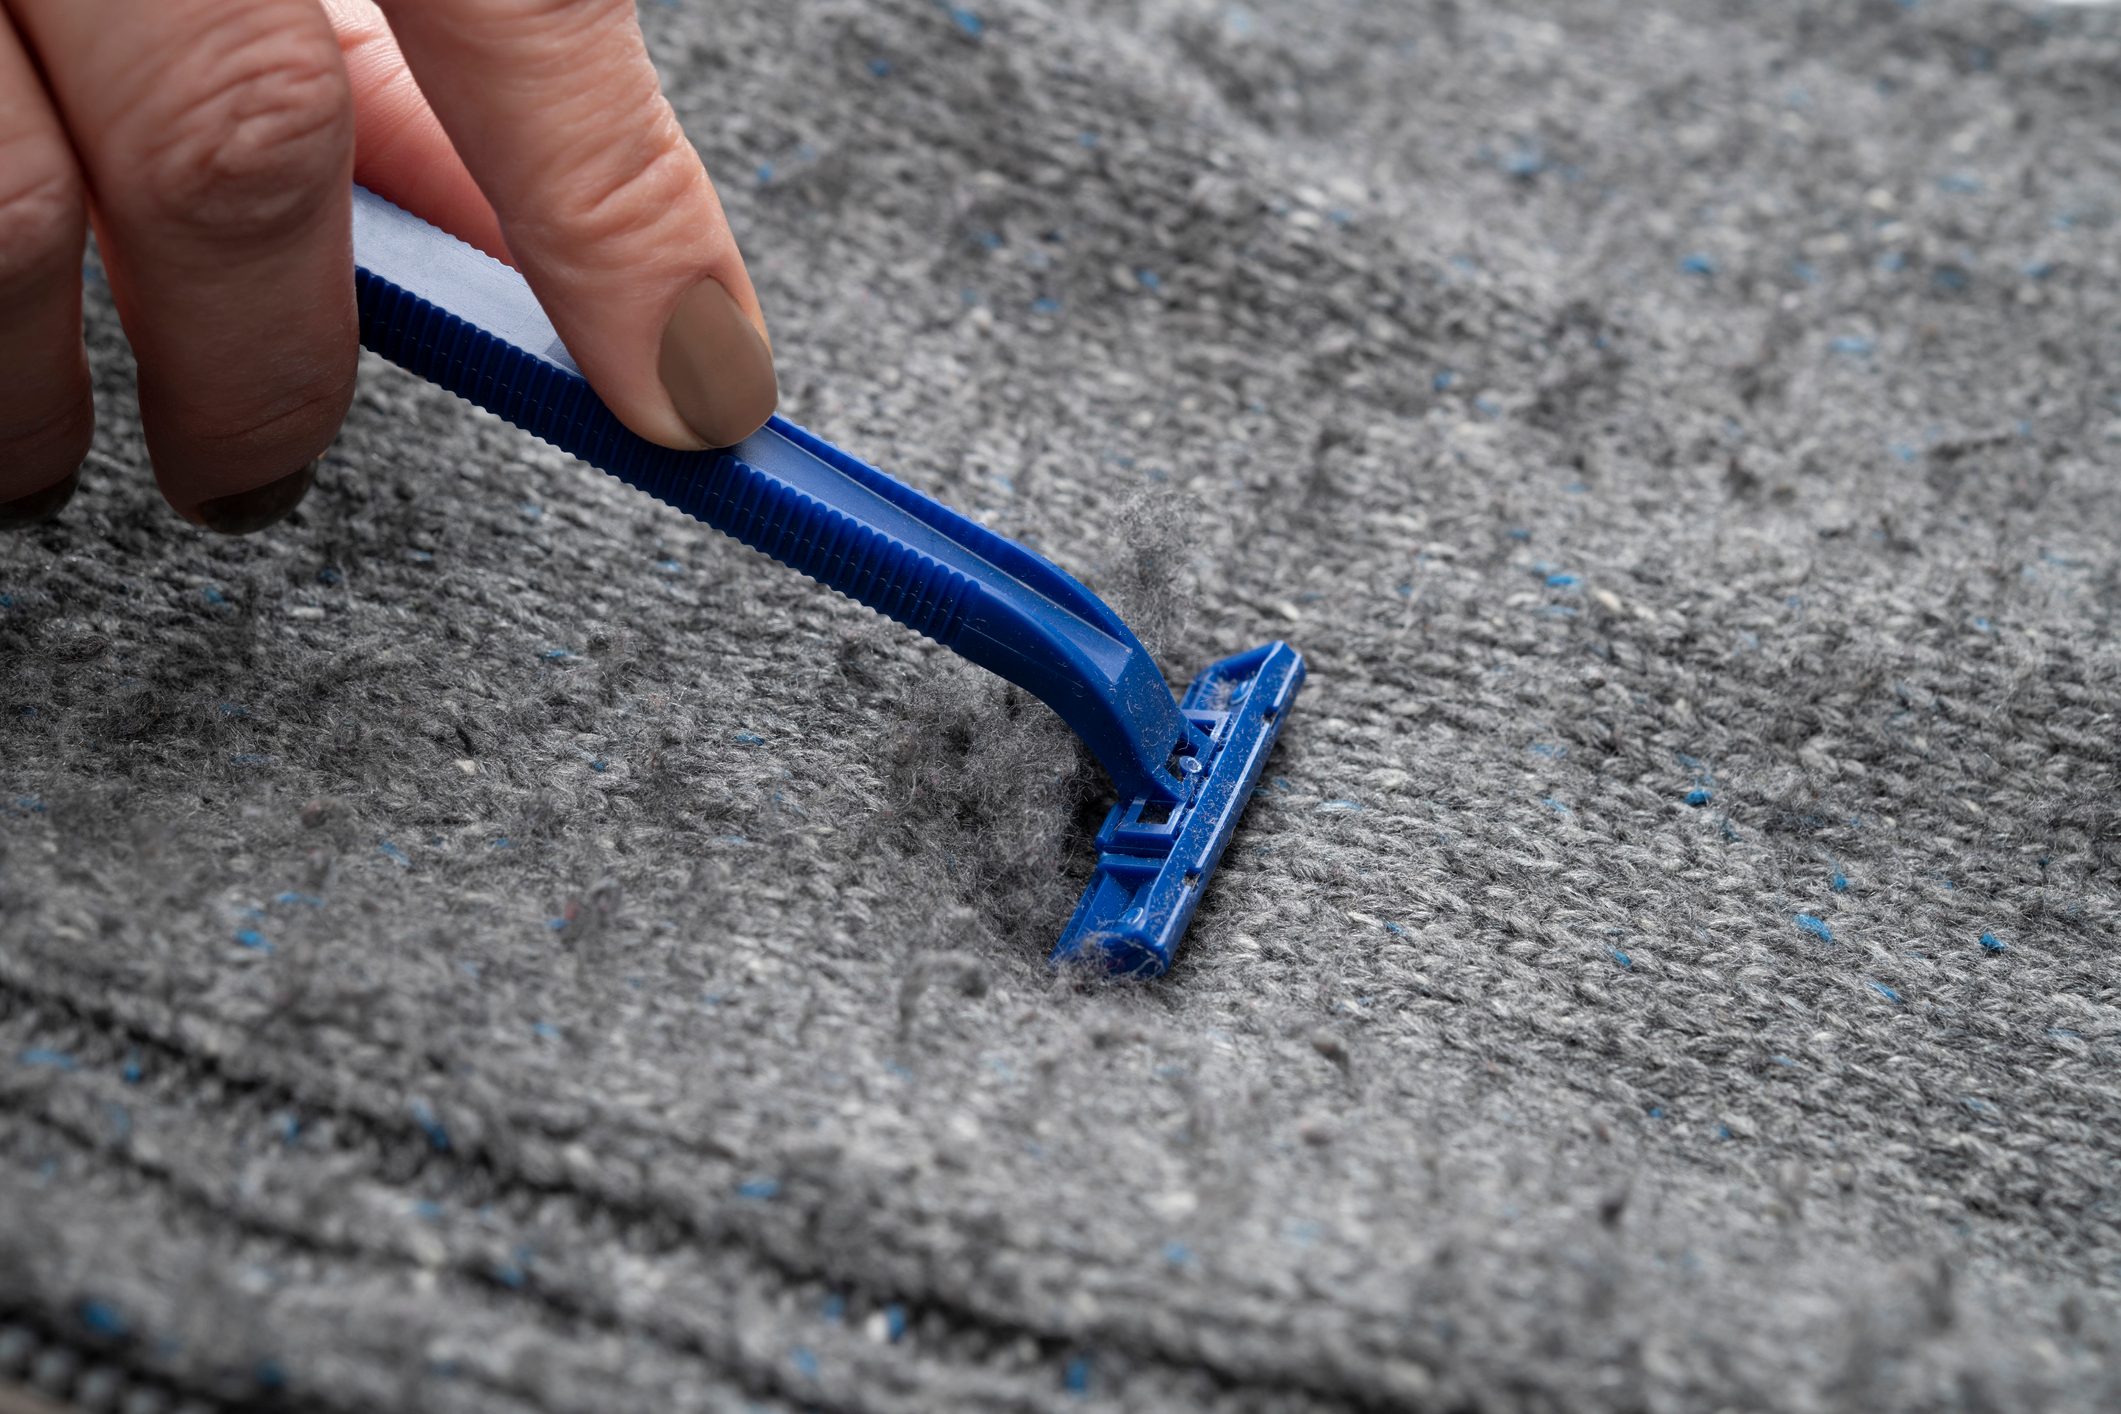 Remove Lint from Clothes with a Razor